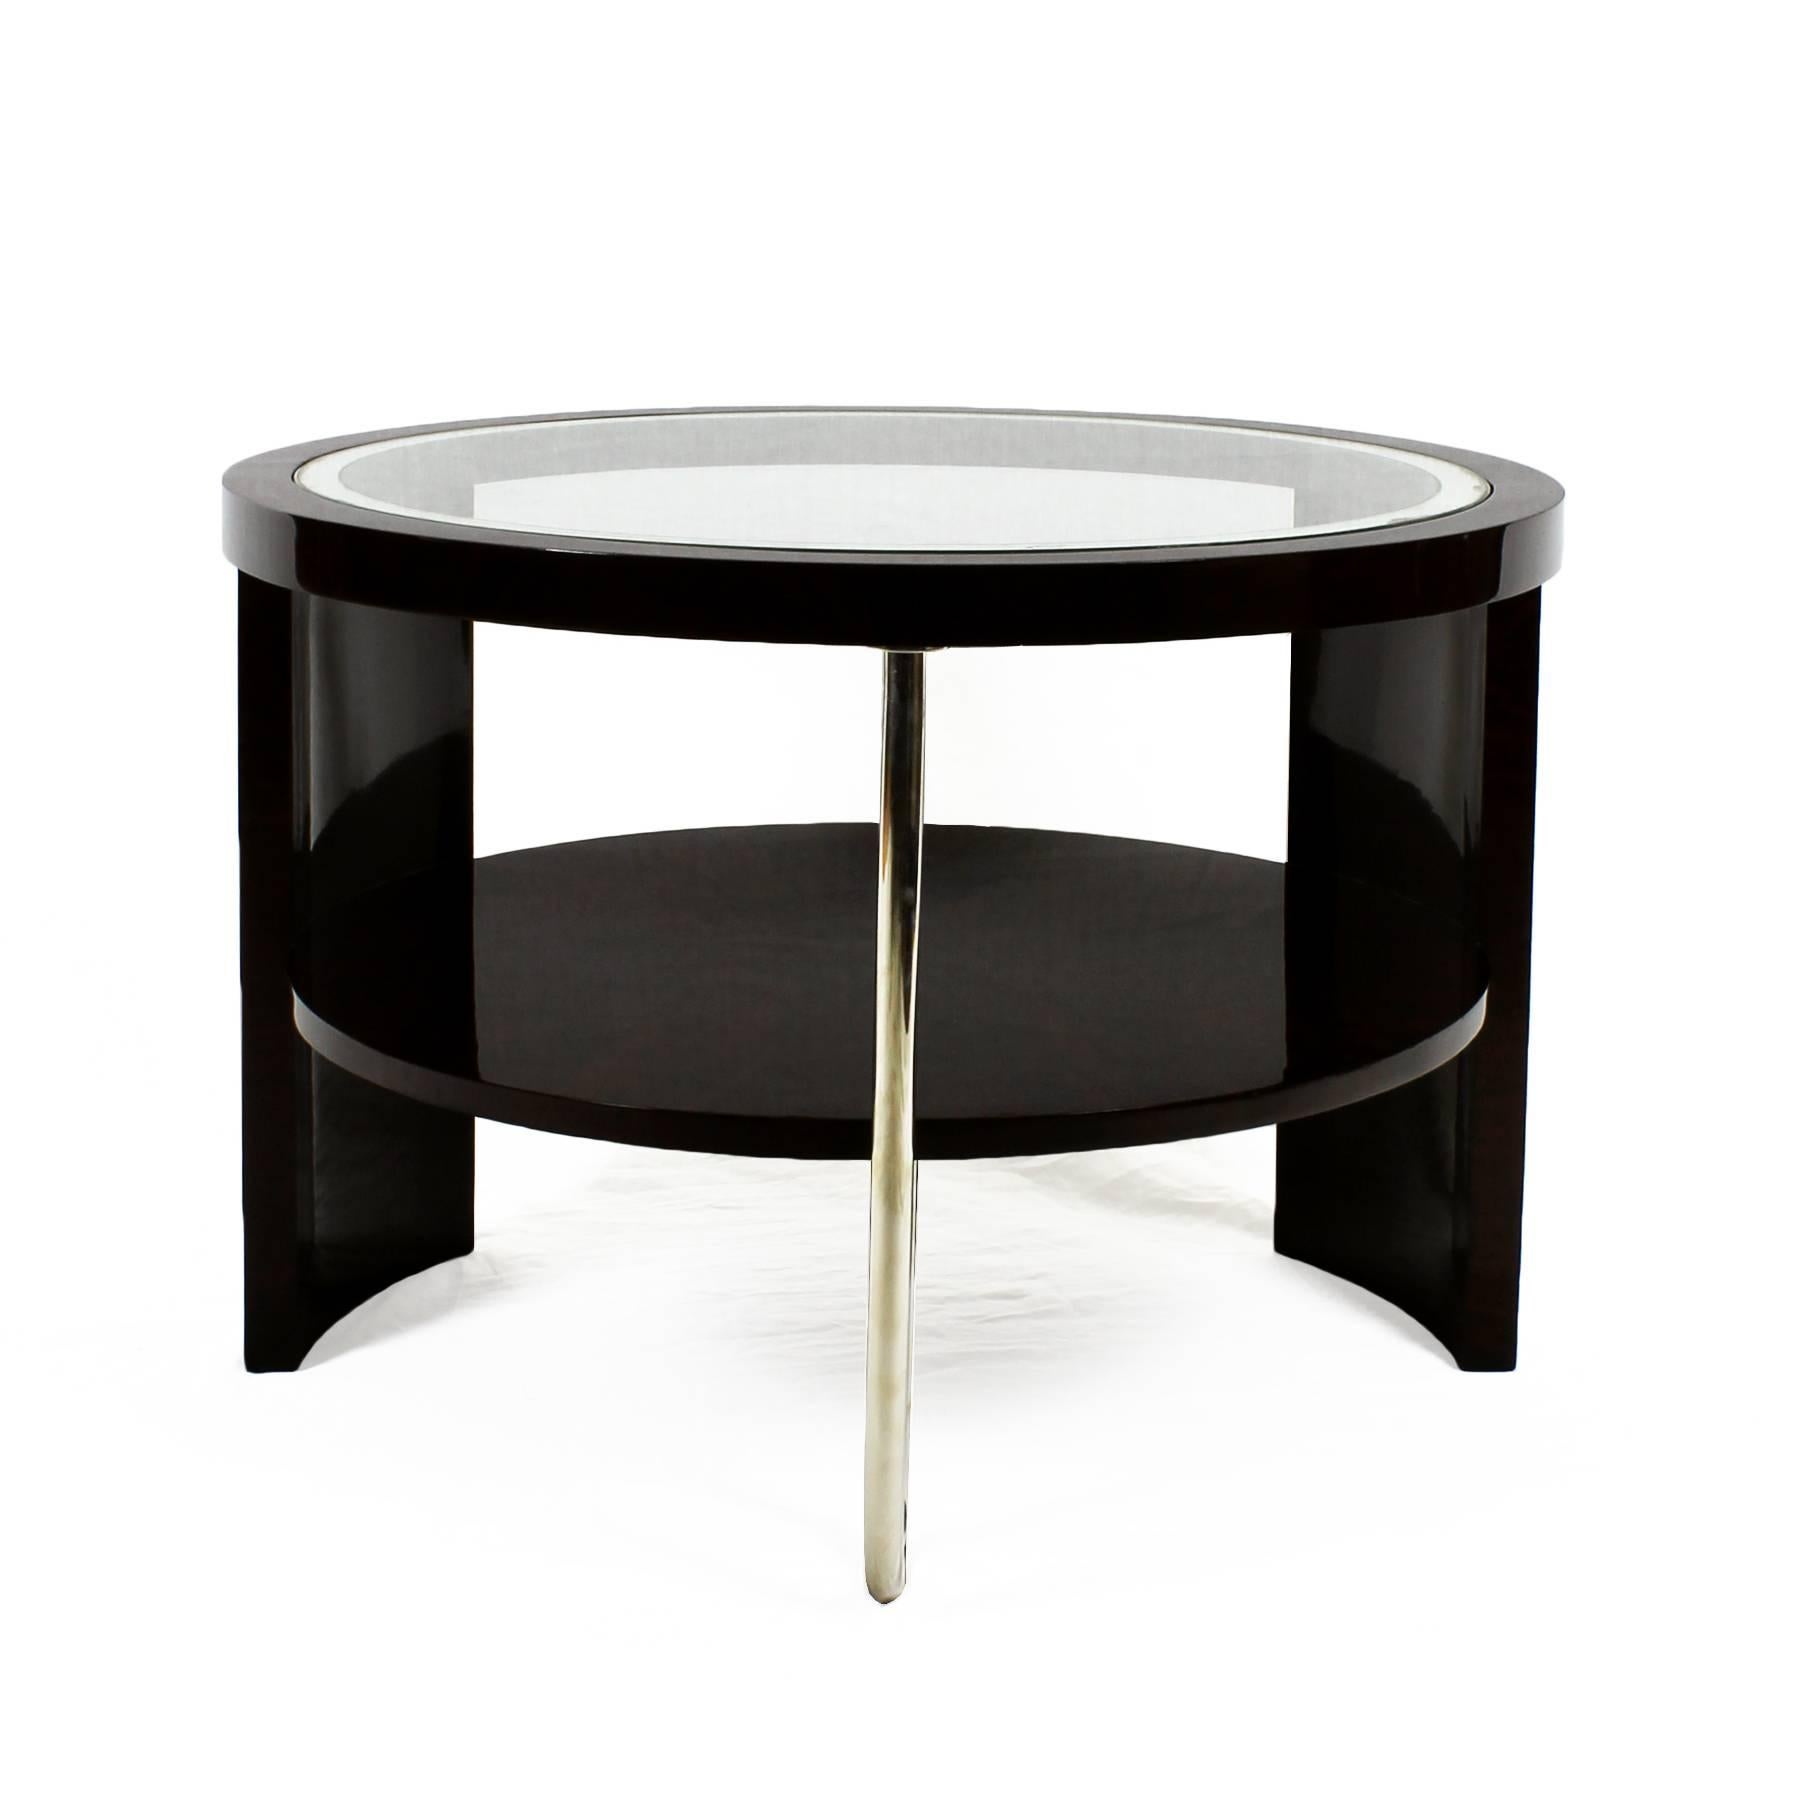 Plated 1930s Art Deco Tripod Side Table, Dark Rosewood, Chrome, Glass, Marquetry, Italy